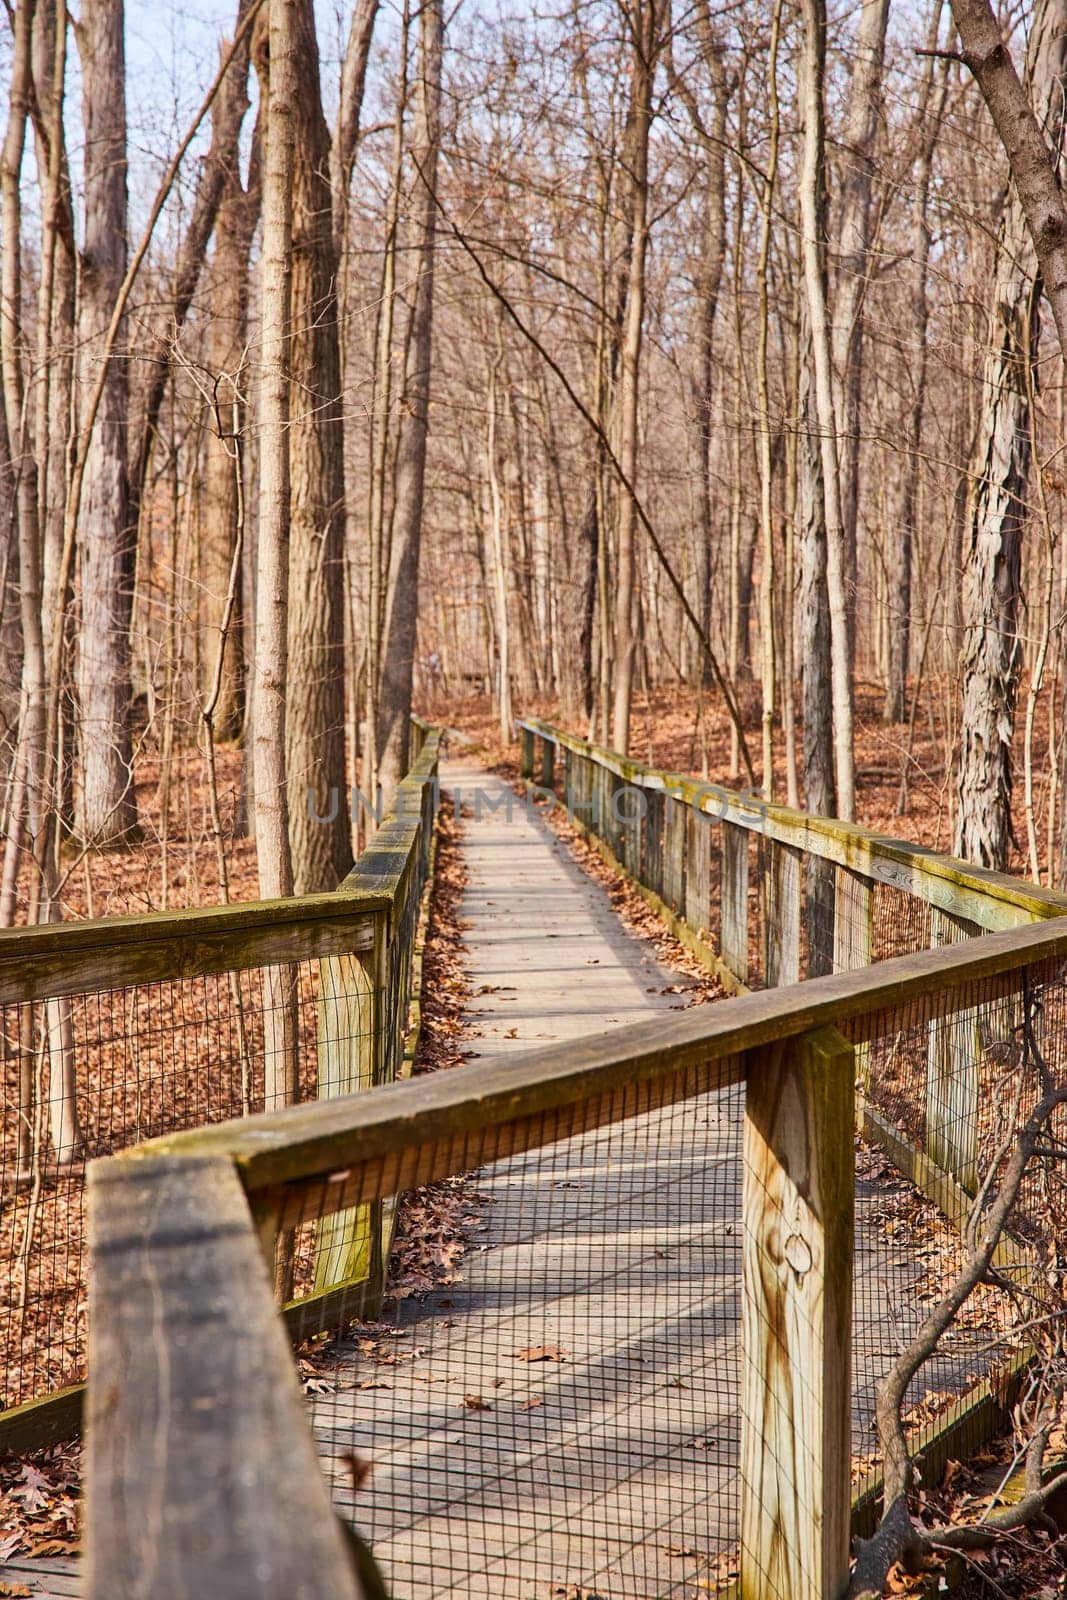 Tranquil autumn scene of a wooden boardwalk winding through a leafless forest at Lindenwood Preserve in Fort Wayne, Indiana.